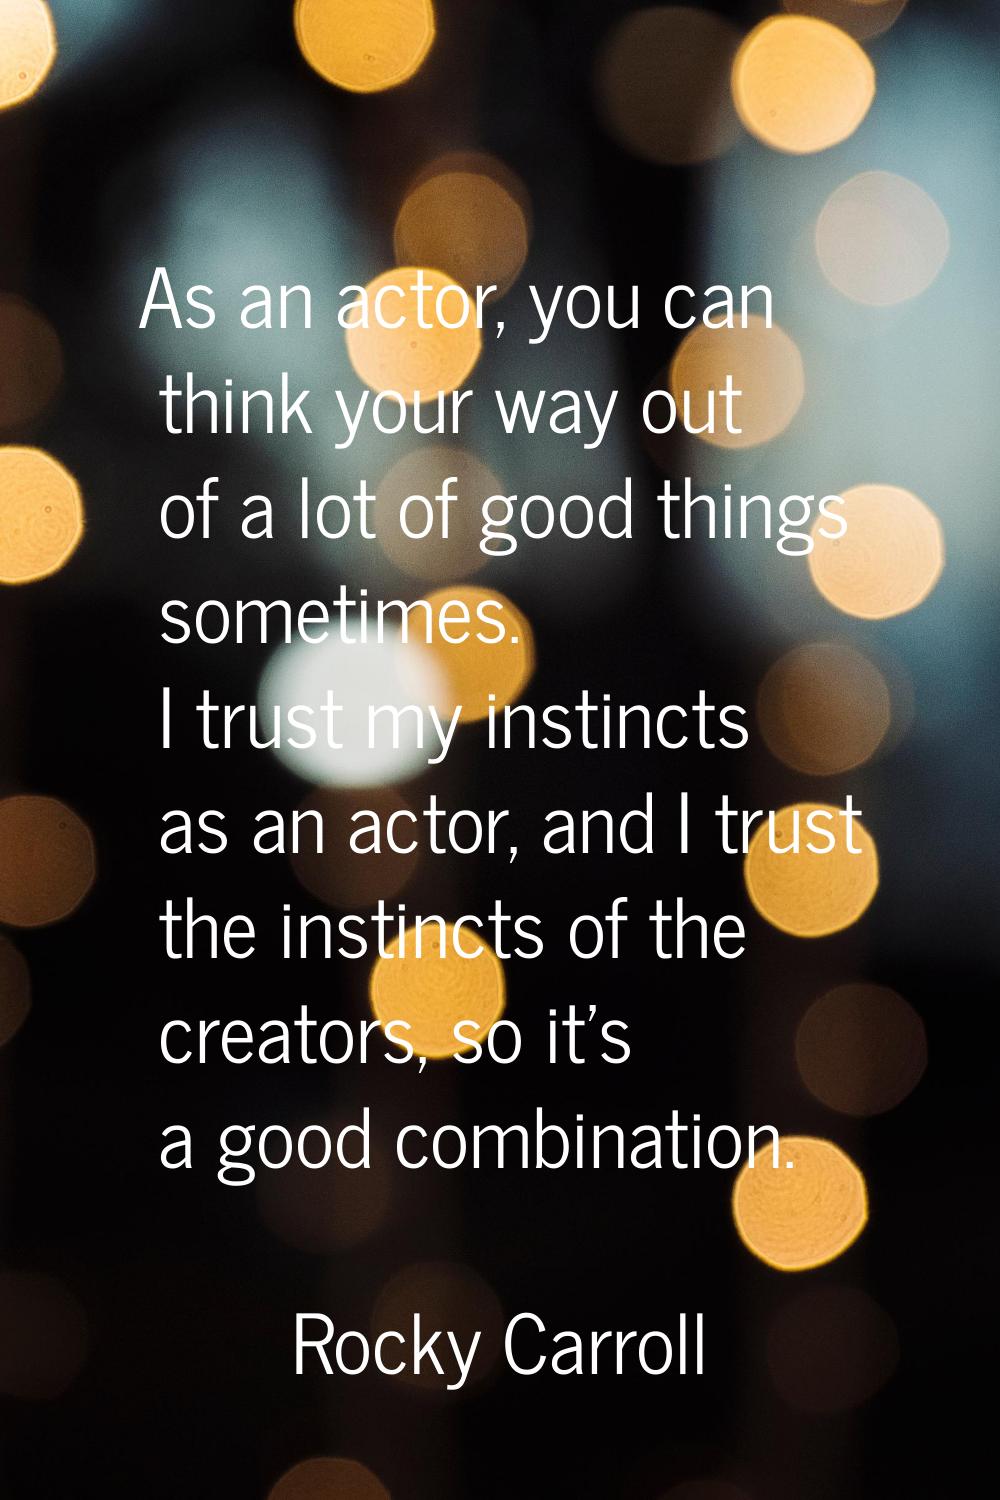 As an actor, you can think your way out of a lot of good things sometimes. I trust my instincts as 